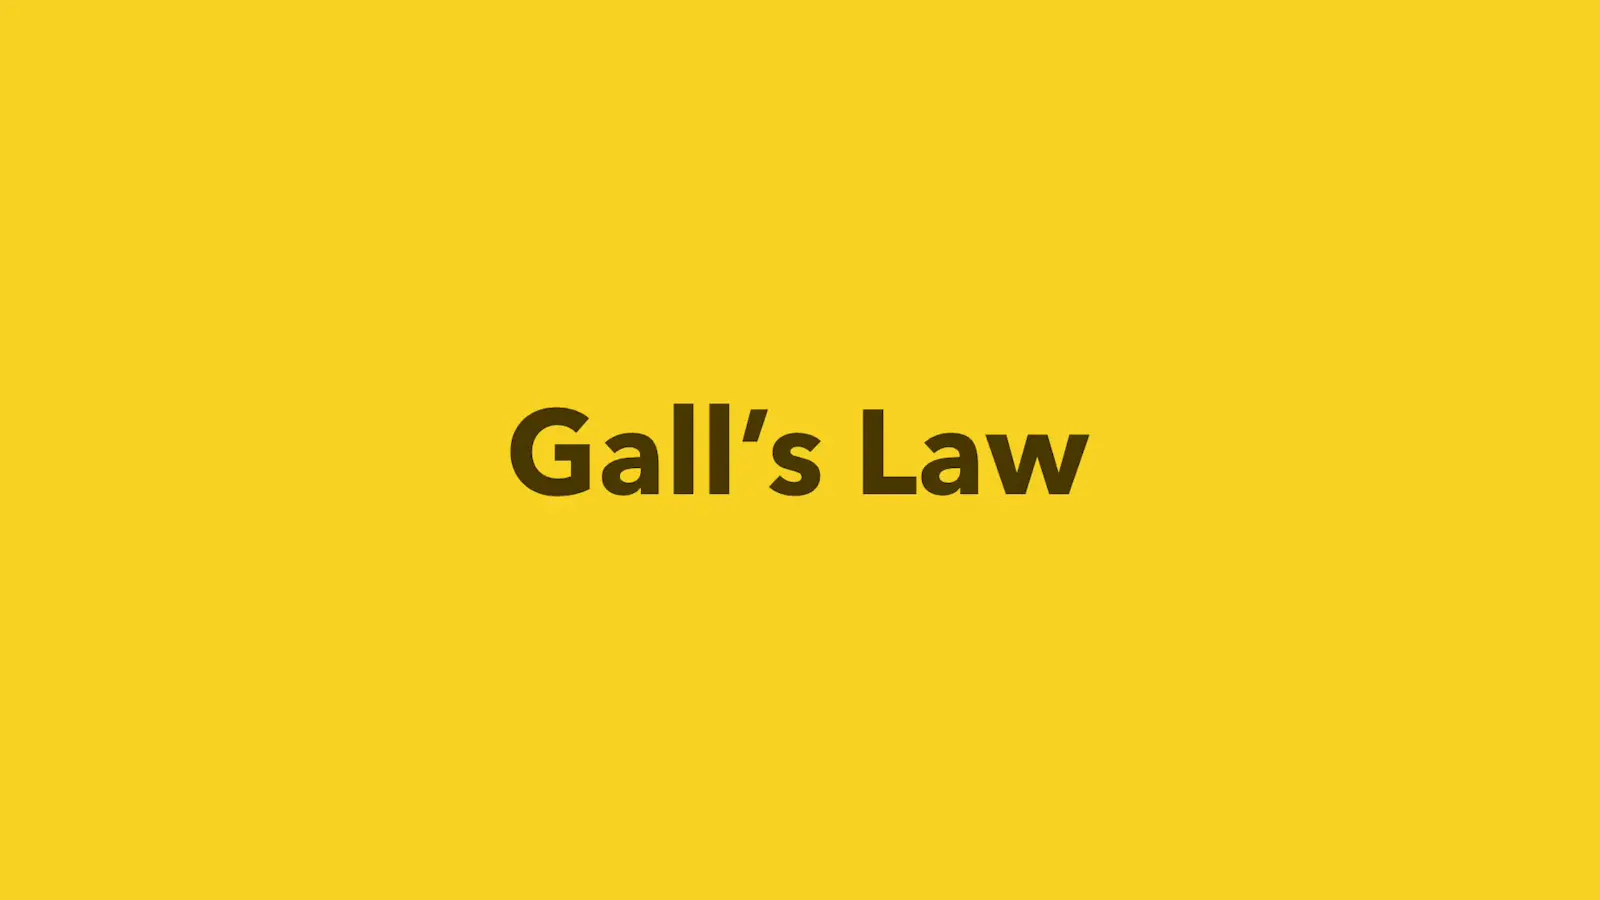 Gall’s Law